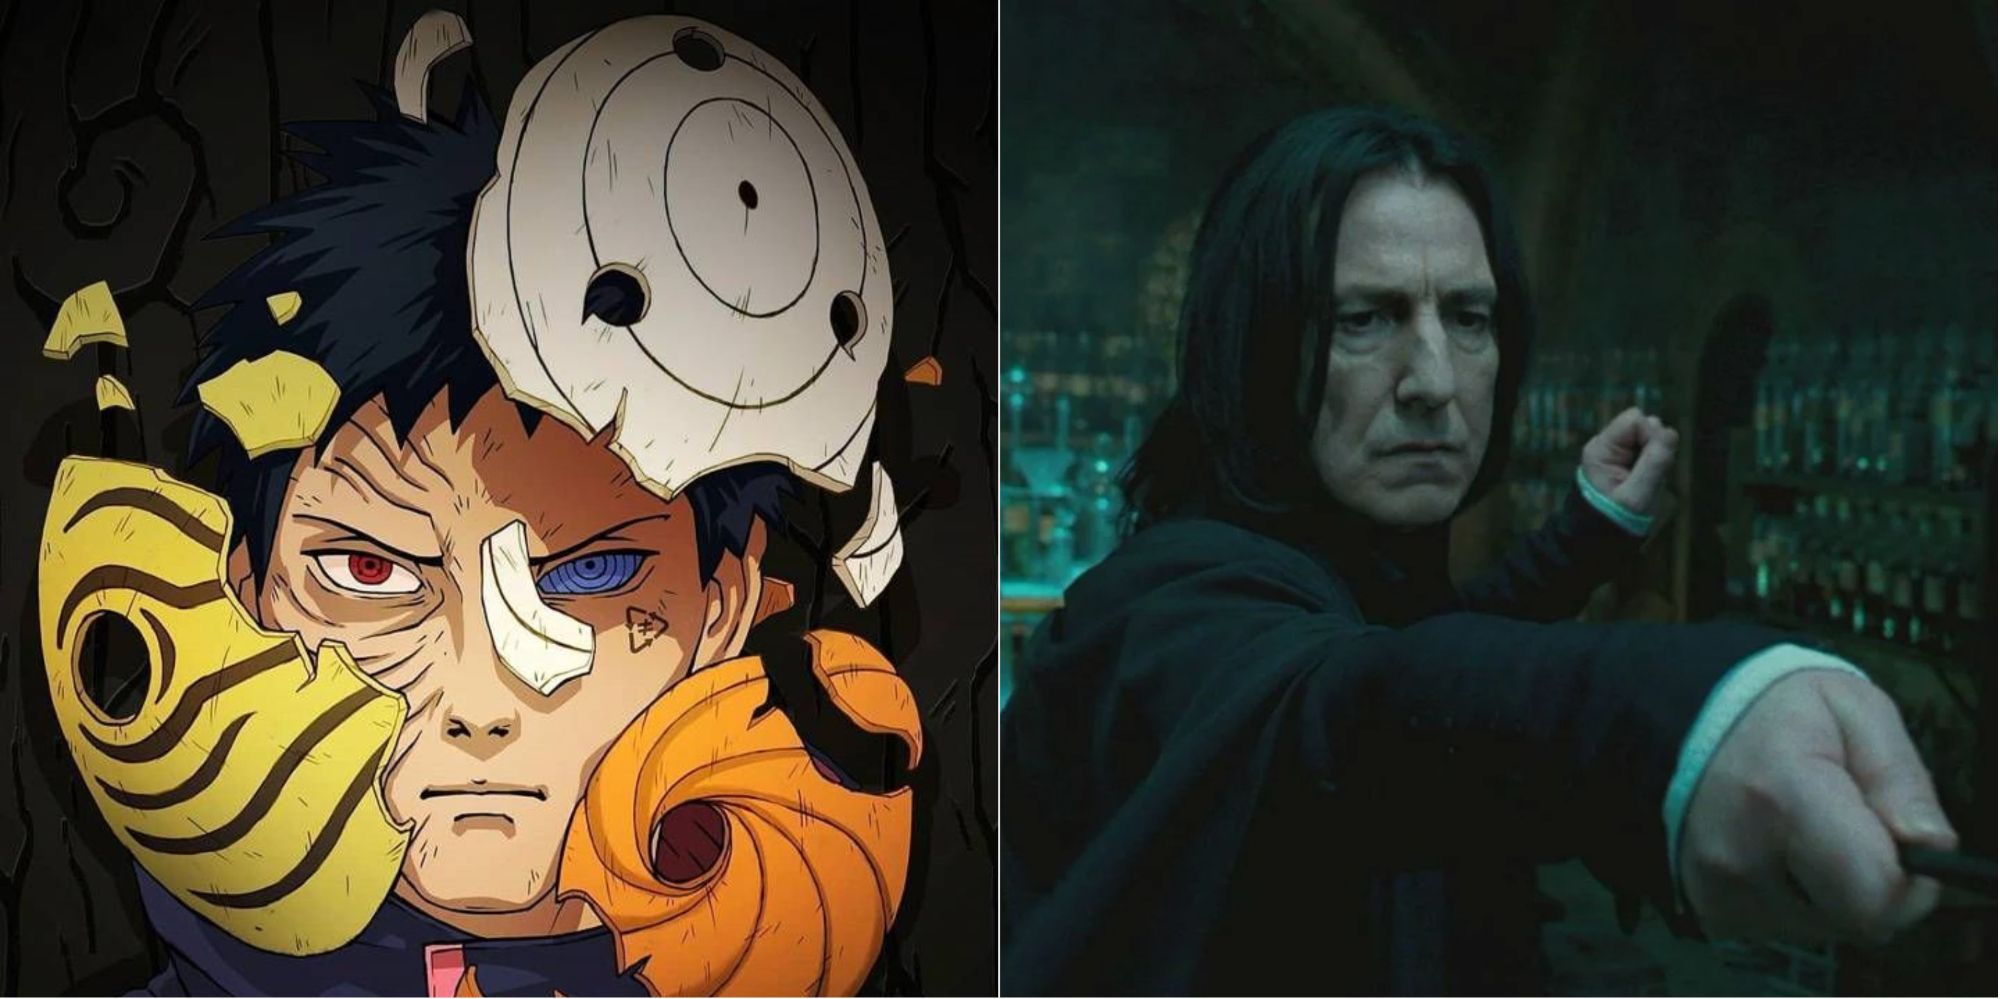 split image of obito uchiha with his masks and severus snape pointing his wand